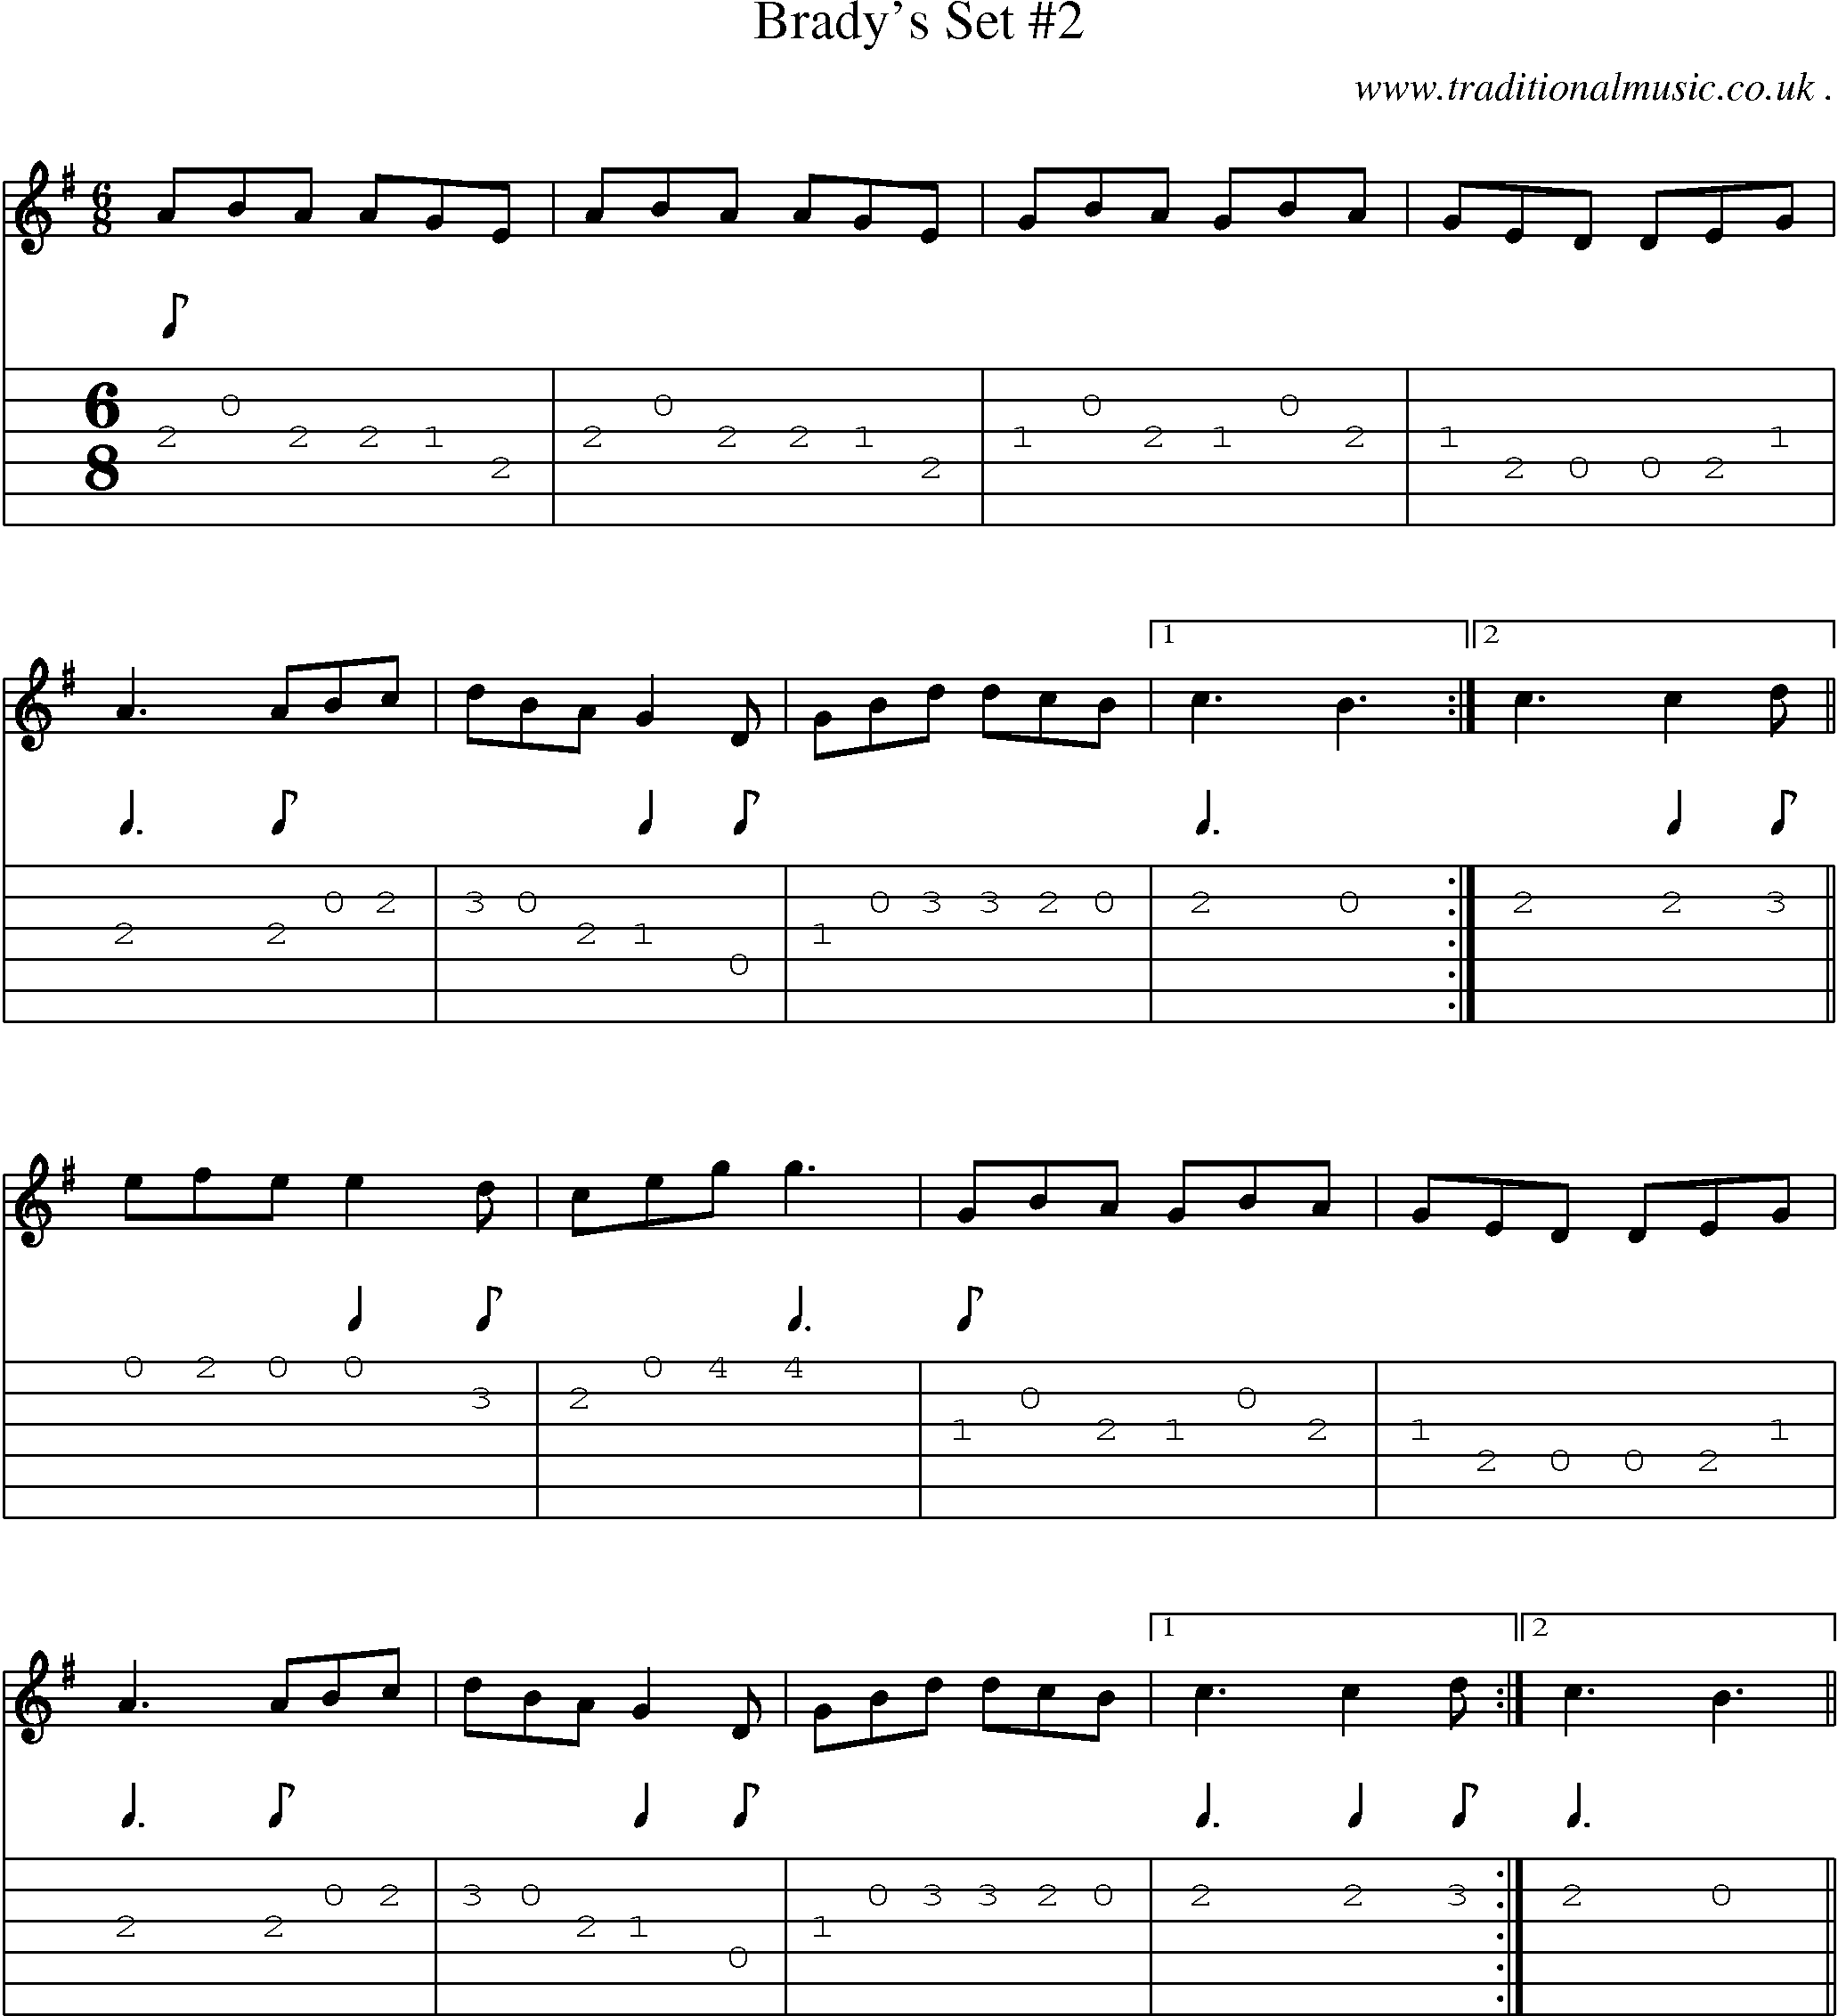 Sheet-Music and Guitar Tabs for Bradys Set 2